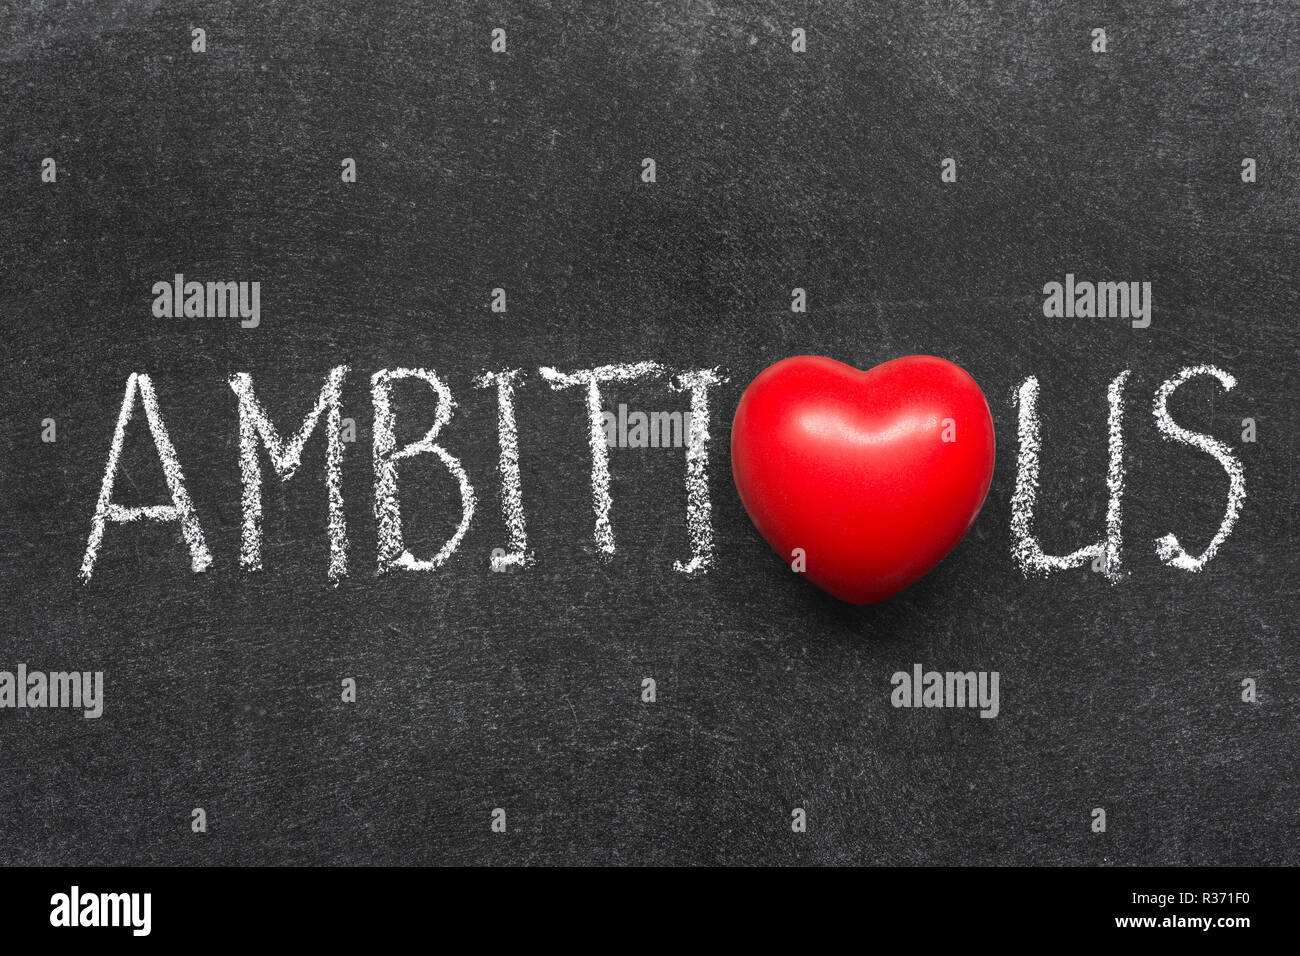 ambitious word handwritten on blackboard with heart symbol instead of O Stock Photo